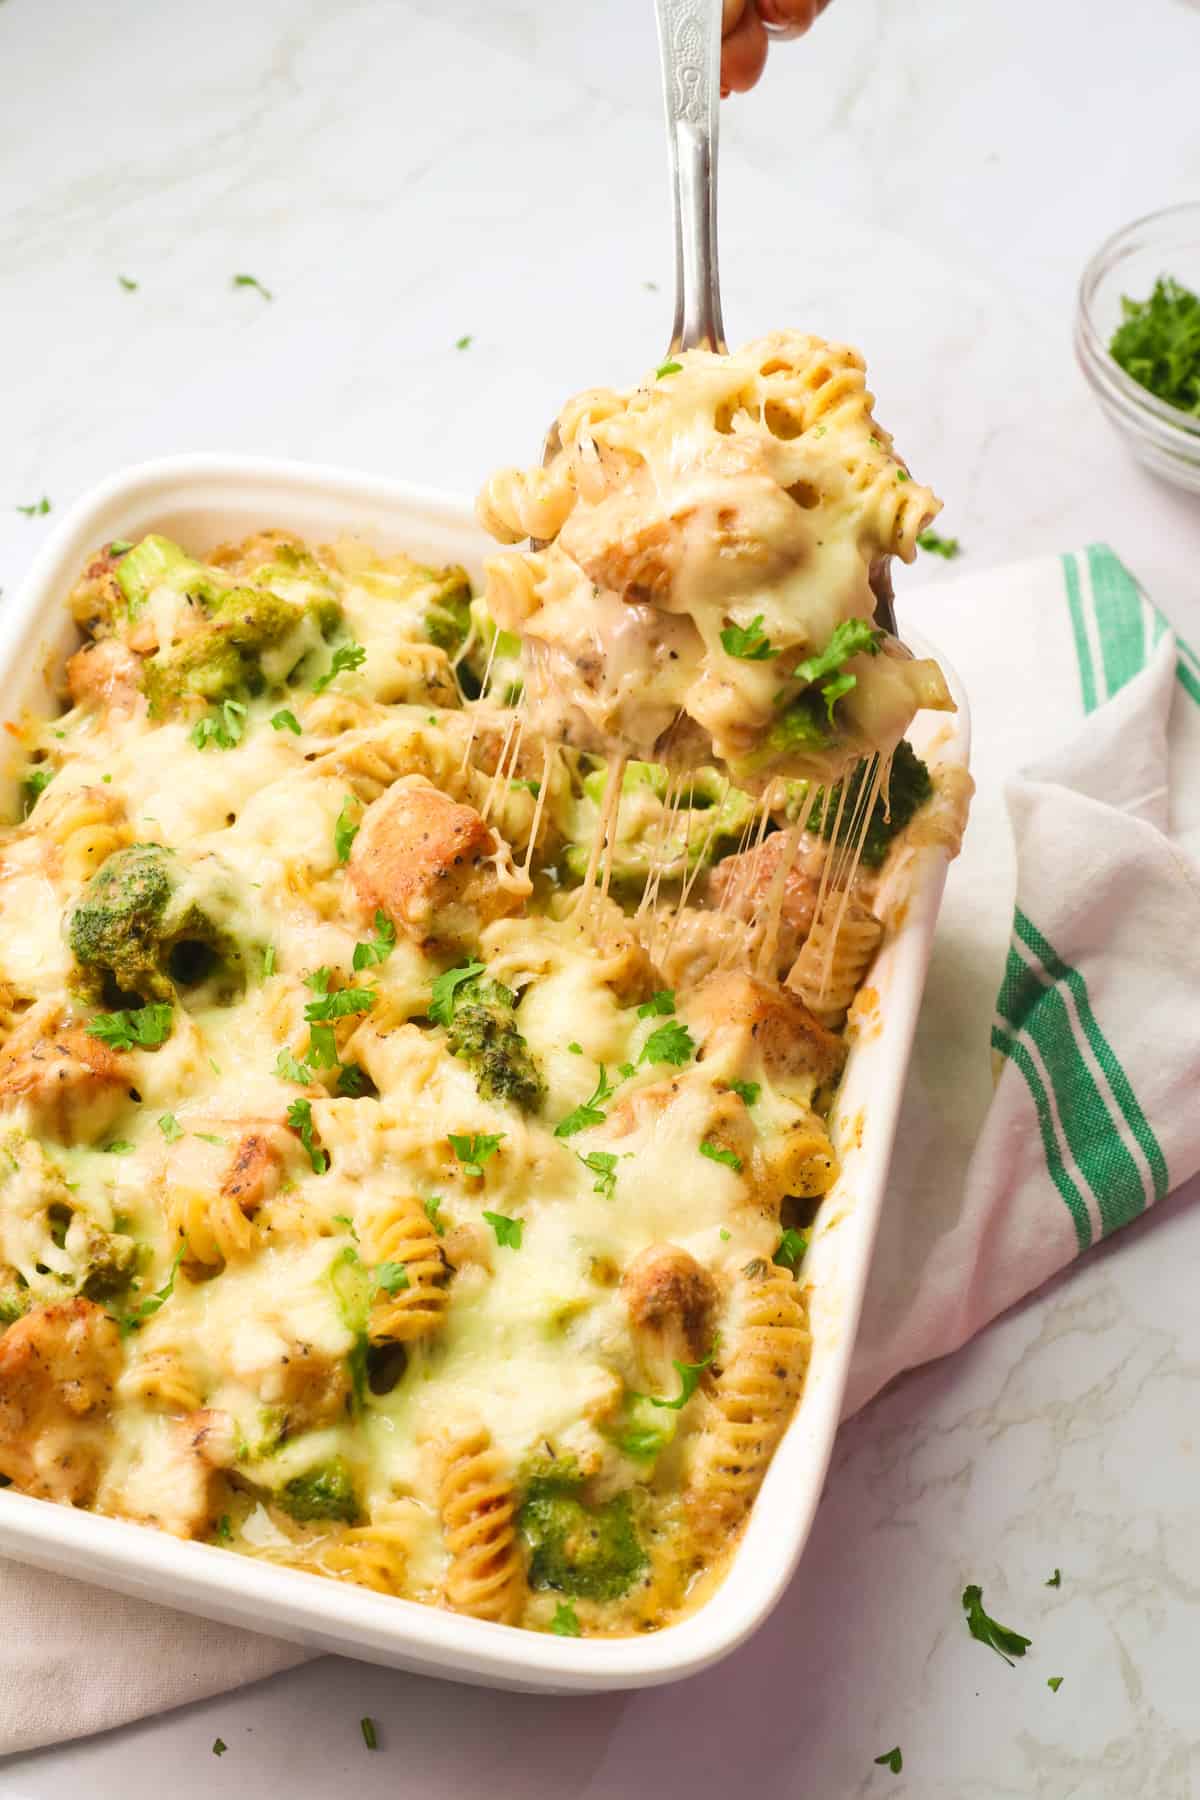 Serving up a creamy, soul-satisfying Chicken Pasta Bake